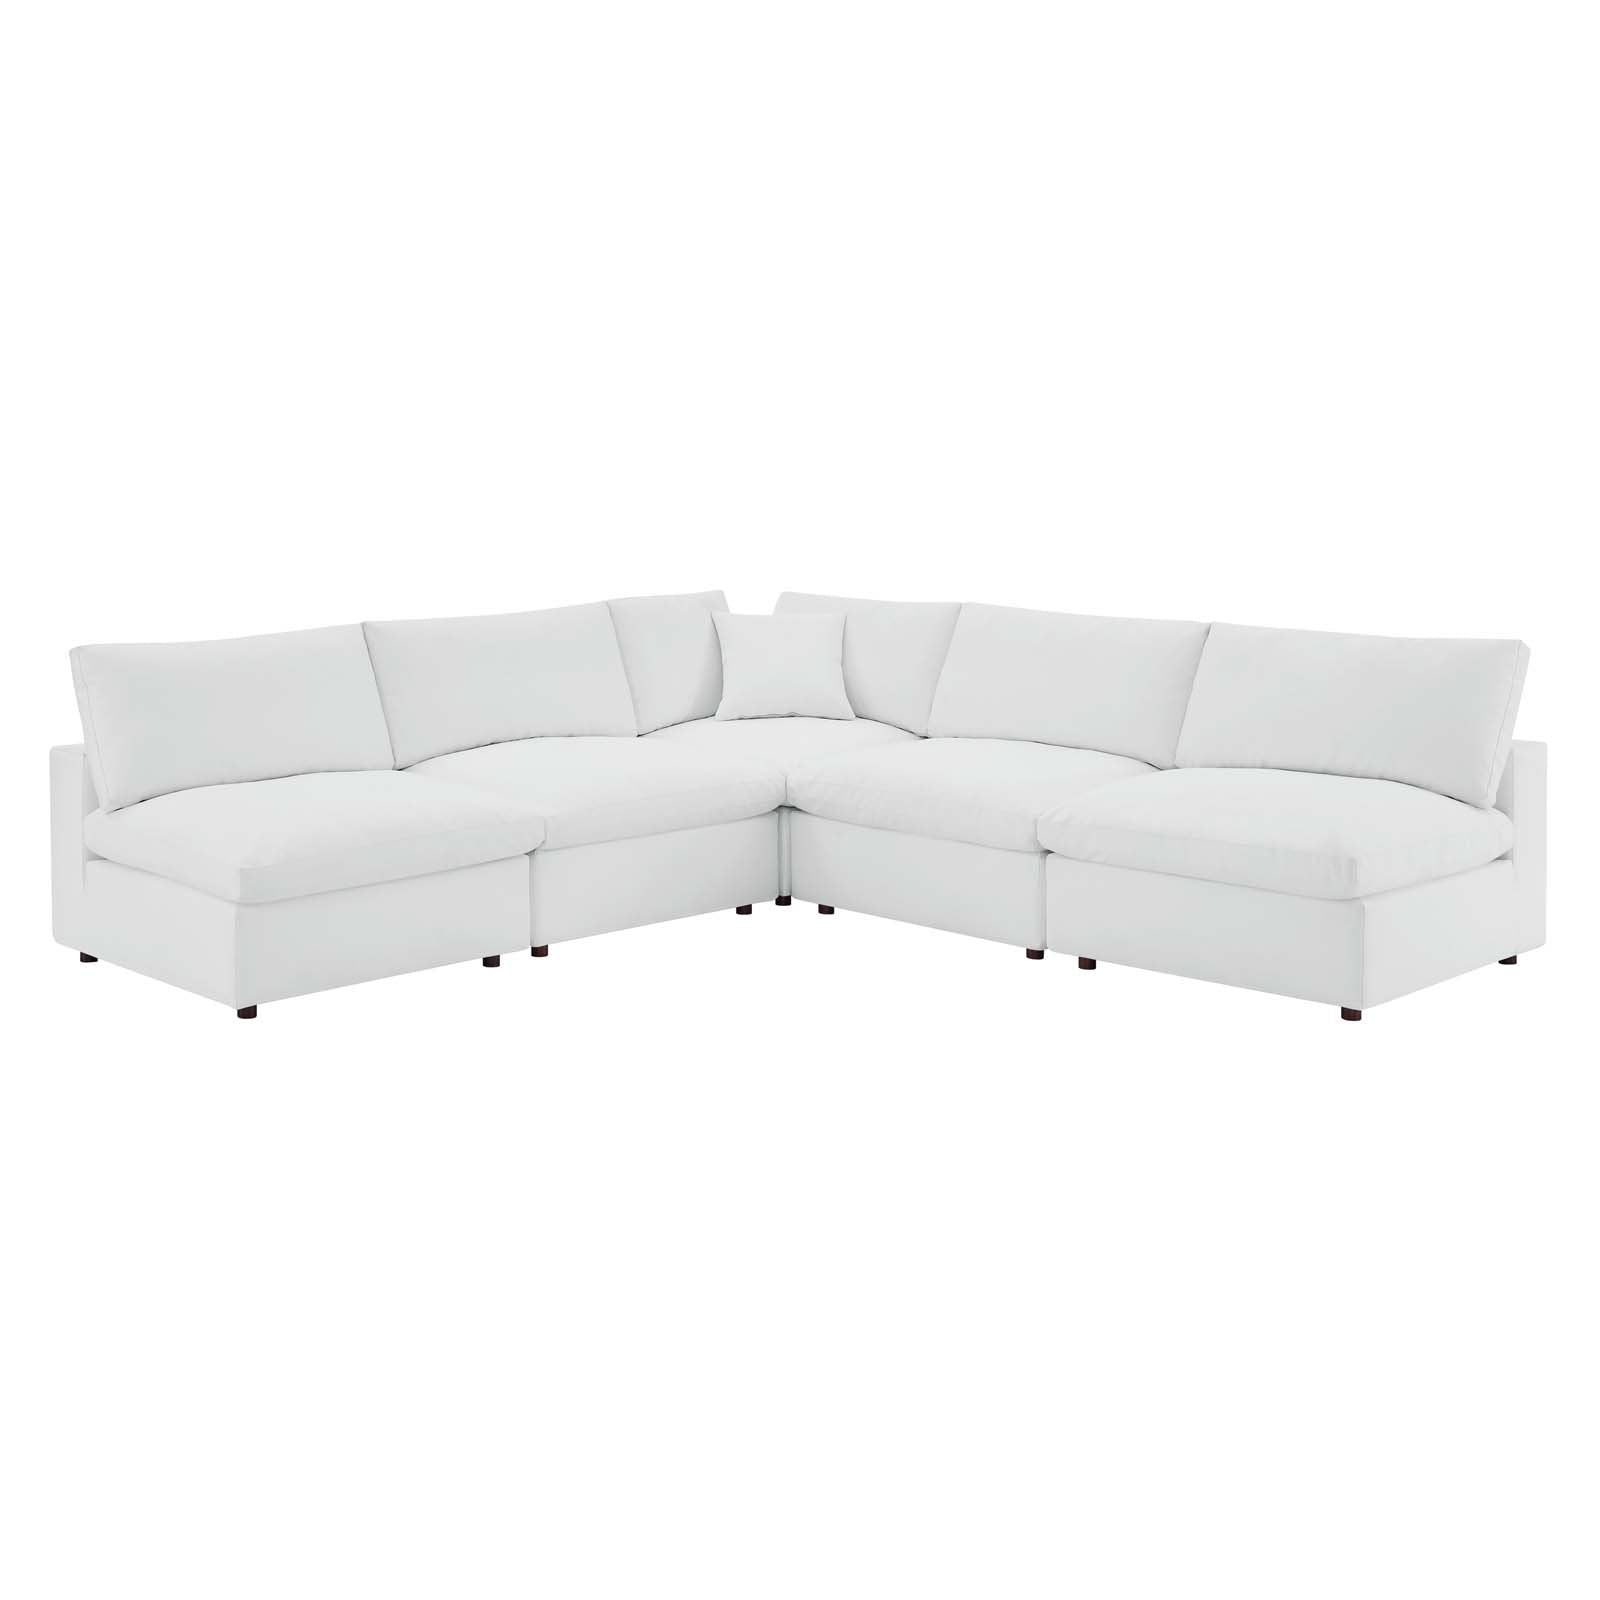 Commix Down Filled Overstuffed Vegan Leather 5-Piece Sectional Sofa